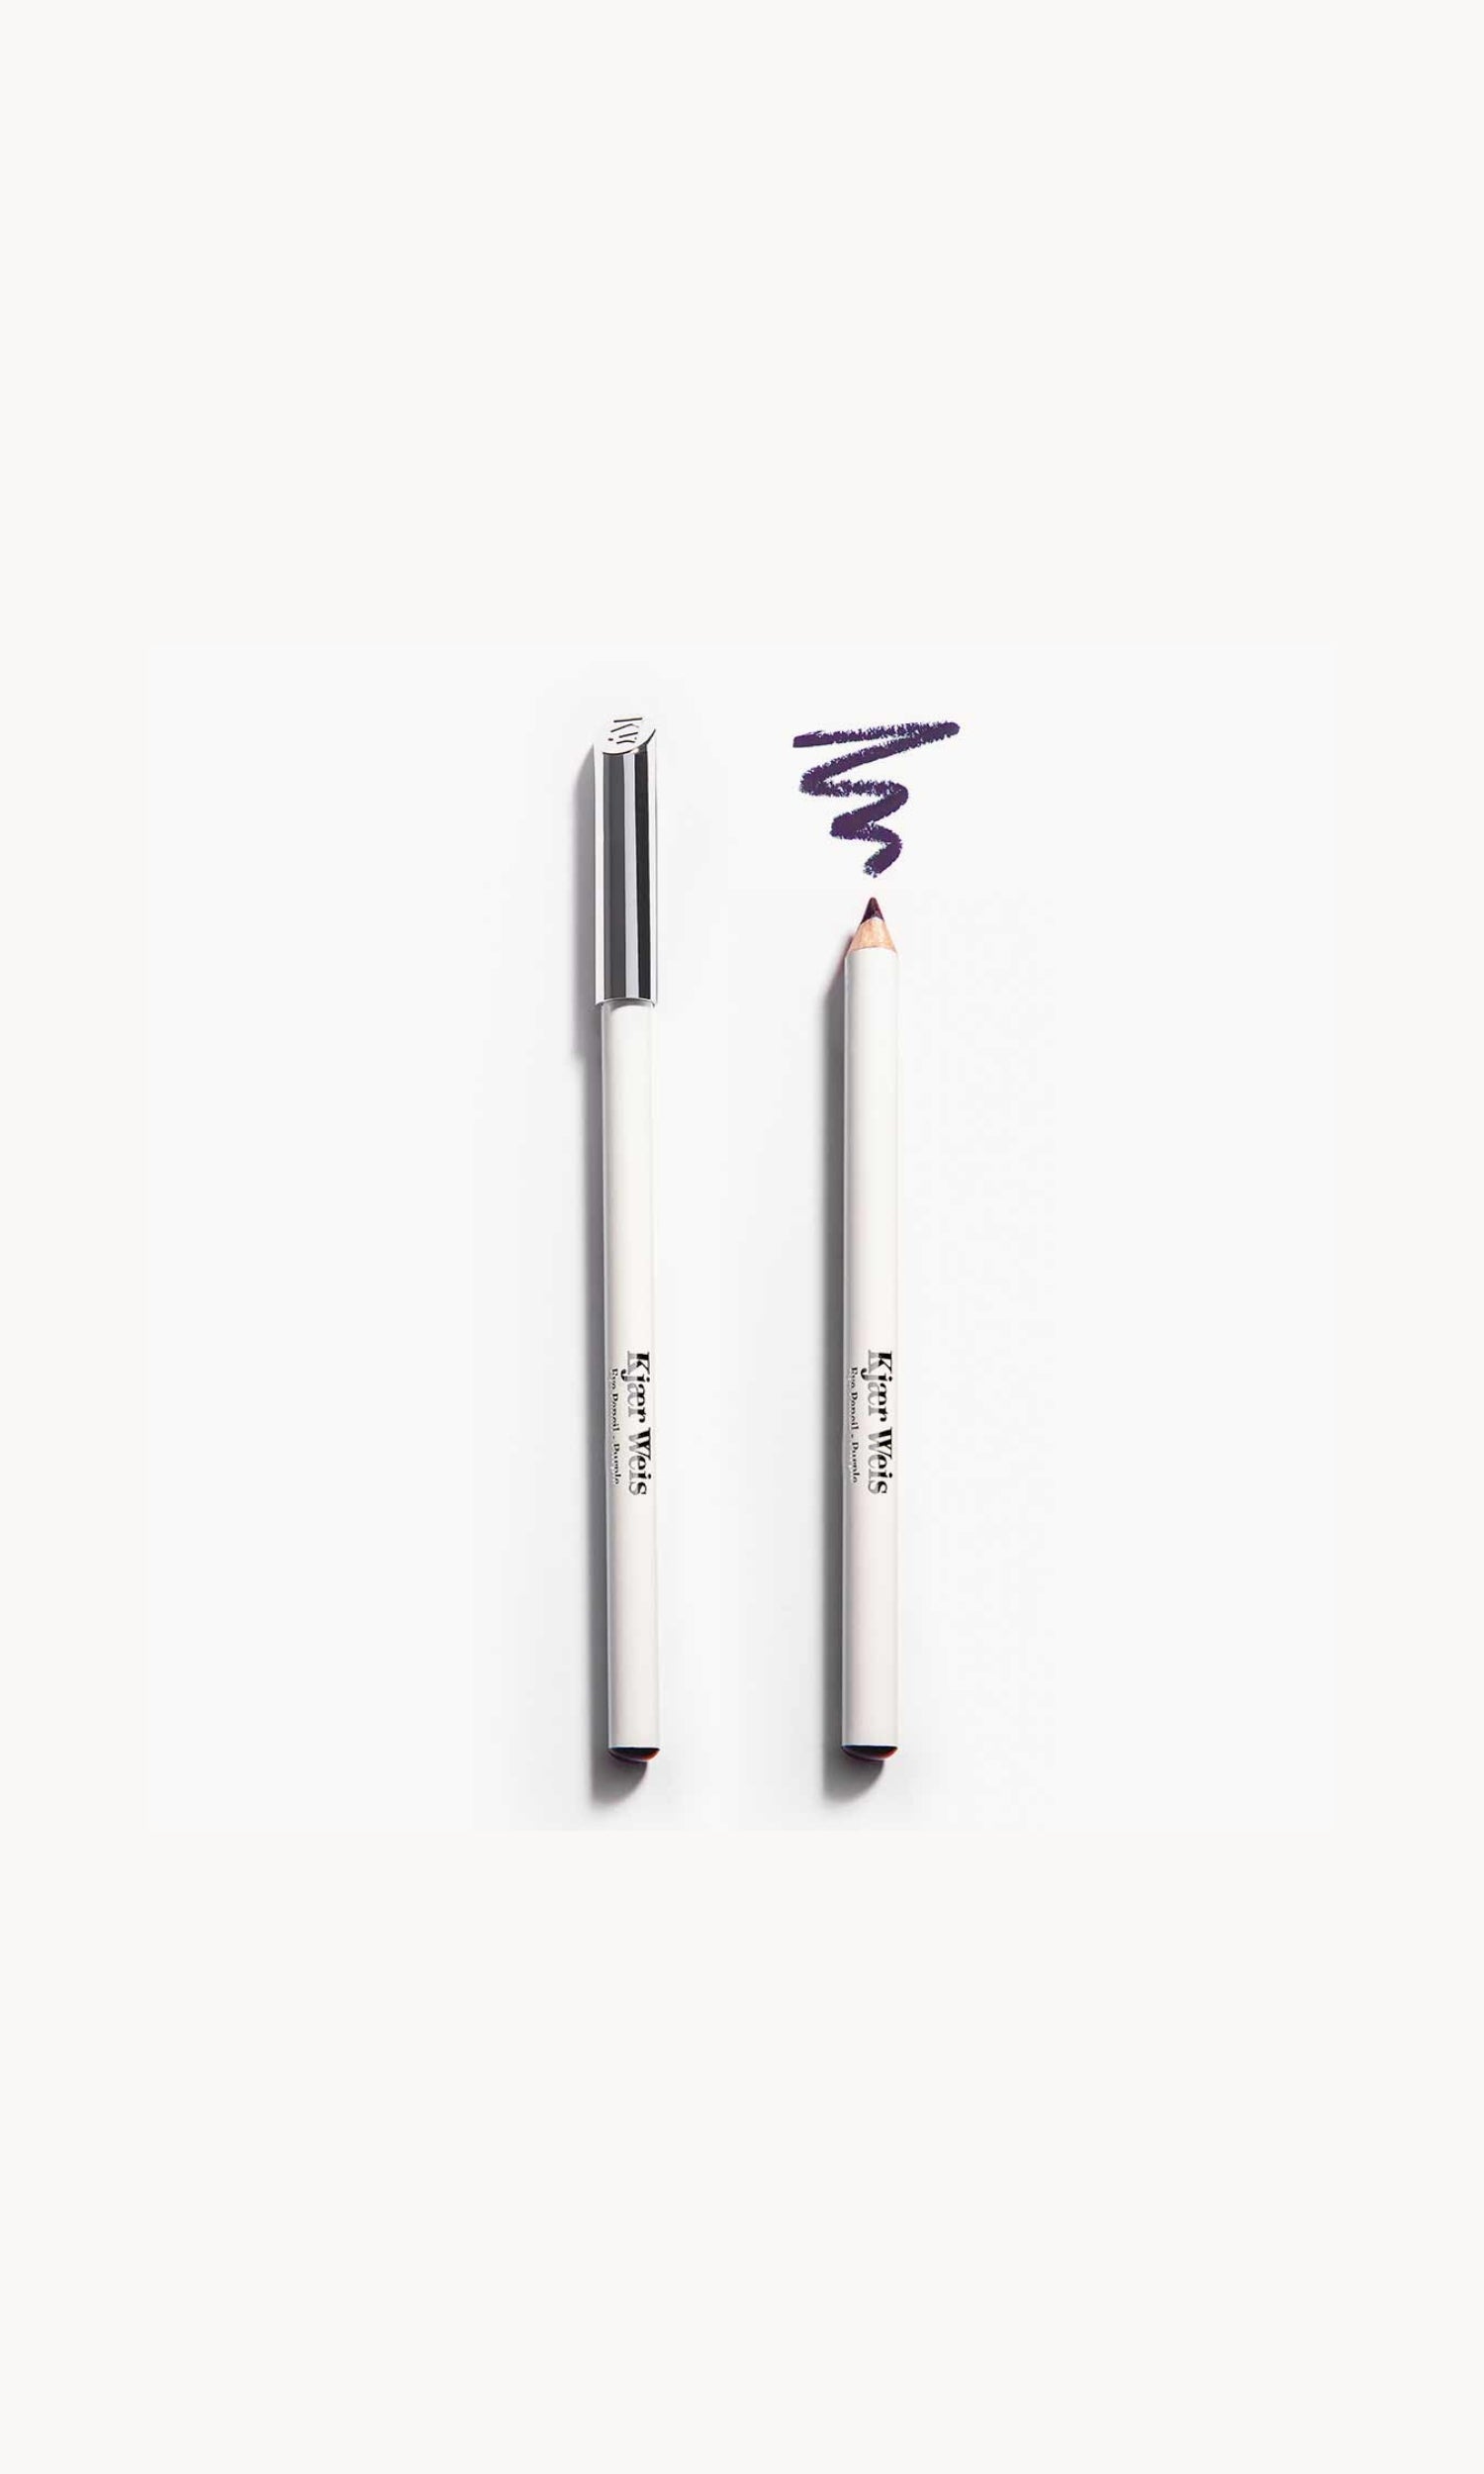 Two white pencils on a white background. Once pencil has a silver lid and the other shows the deep purple pencil with a purple line above it